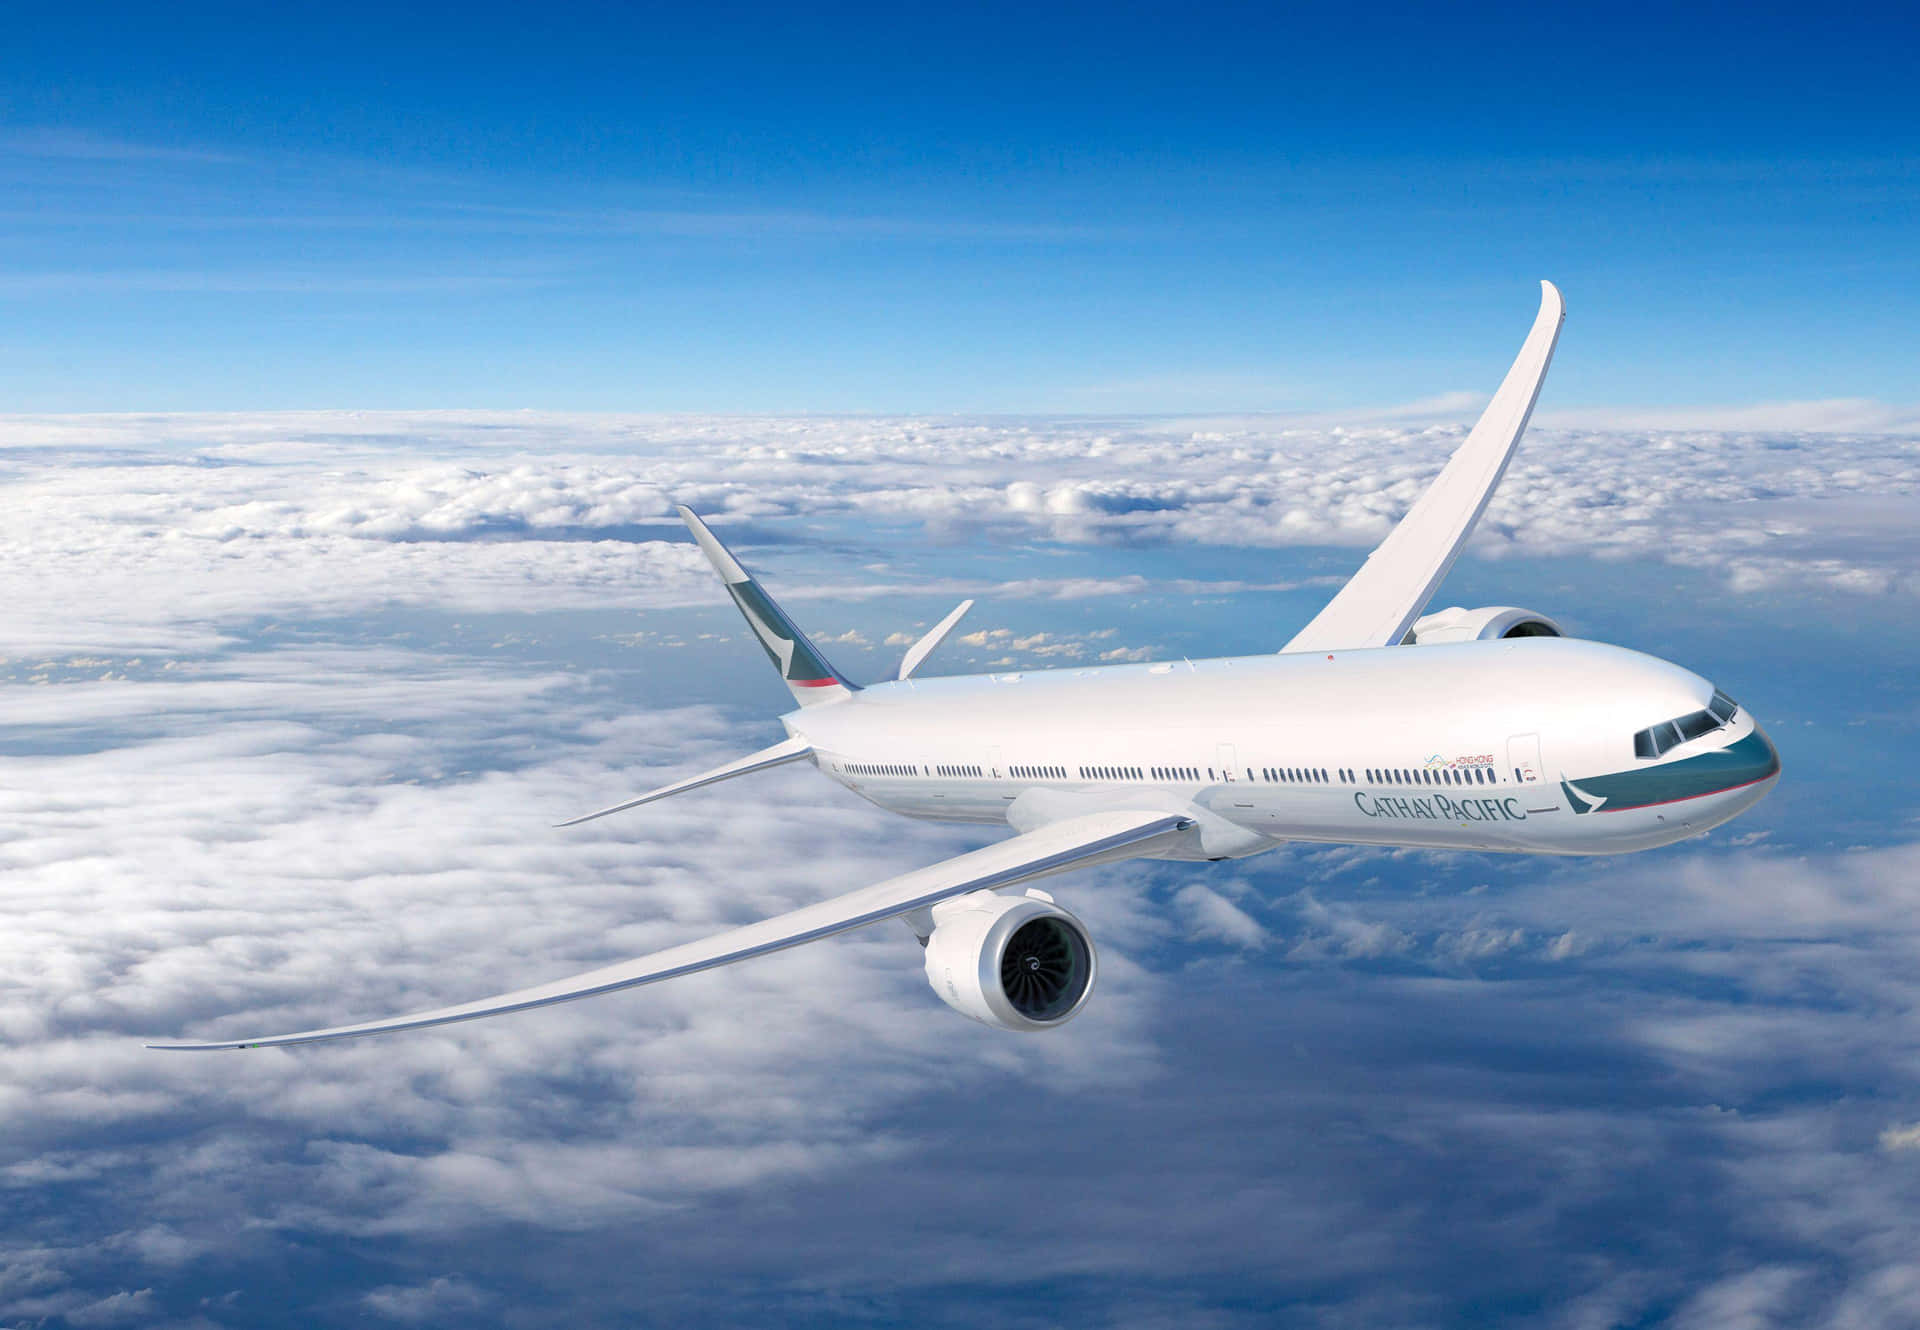 Boeing Aircraft In Flight Over Clouds Wallpaper